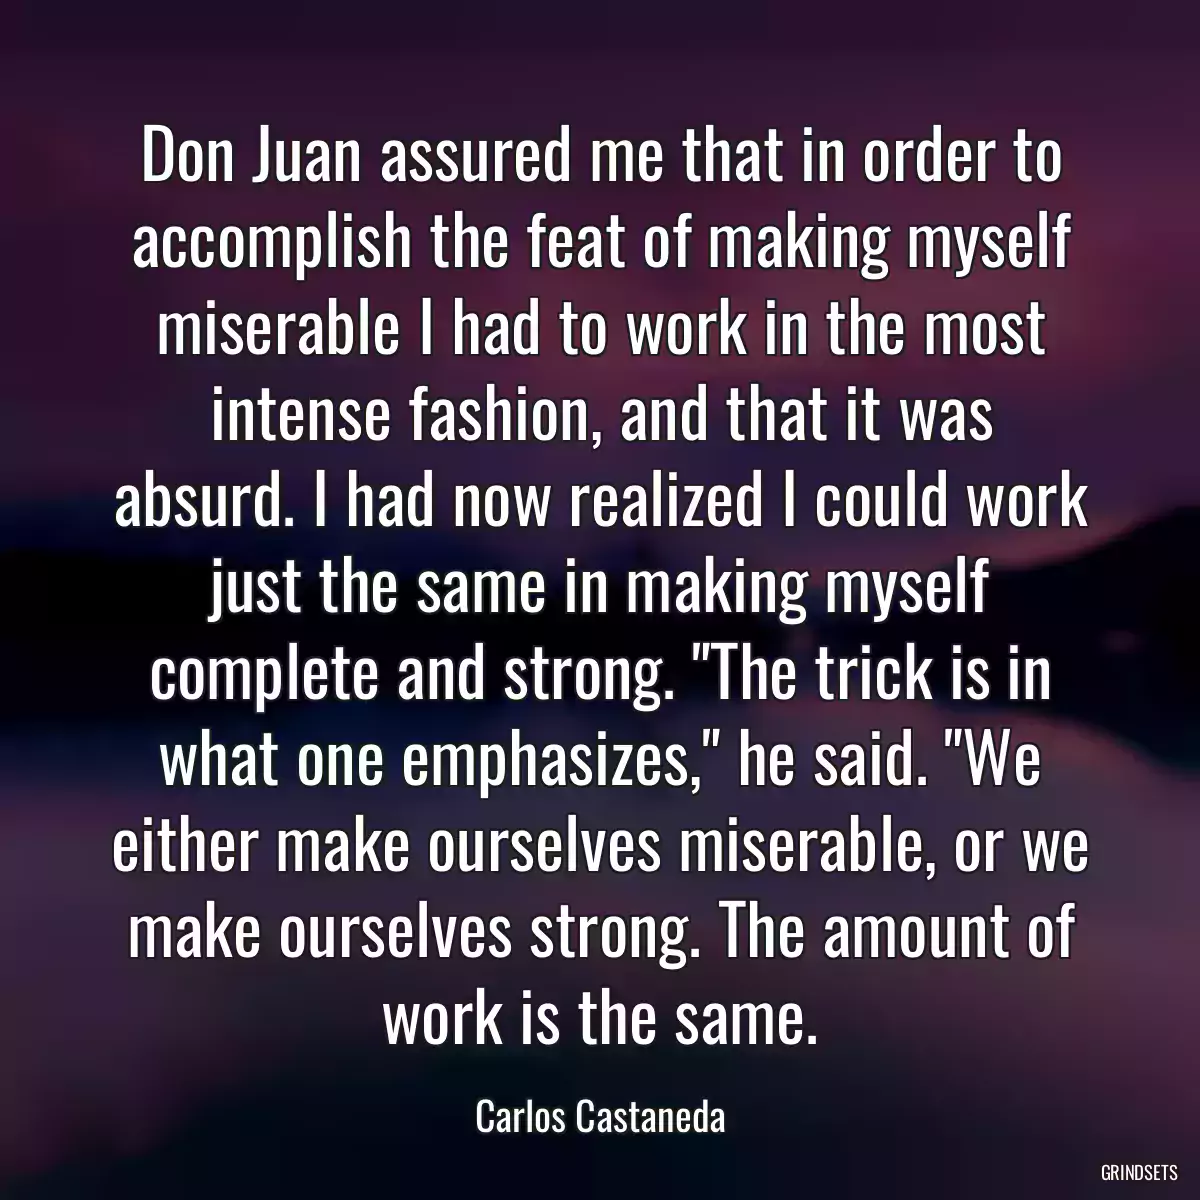 Don Juan assured me that in order to accomplish the feat of making myself miserable I had to work in the most intense fashion, and that it was absurd. I had now realized I could work just the same in making myself complete and strong. \